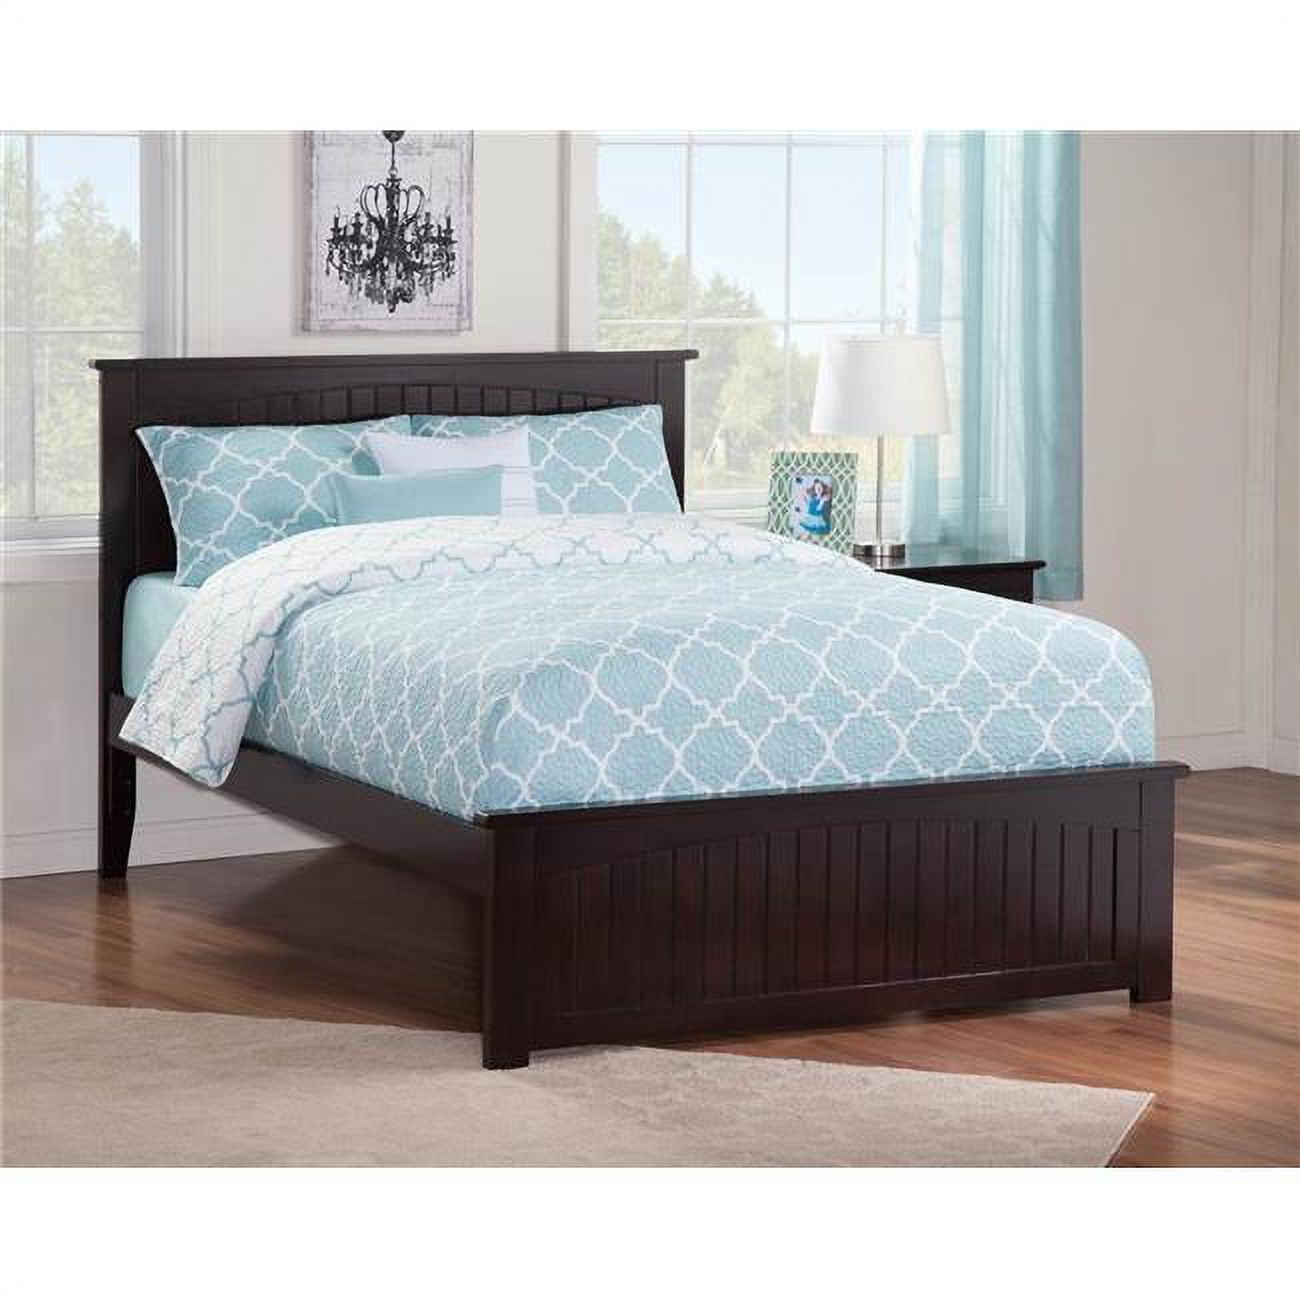 Picture of Atlantic Furniture AR8236031 Nantucket Bed with Match Footboard in Espresso, Full Size